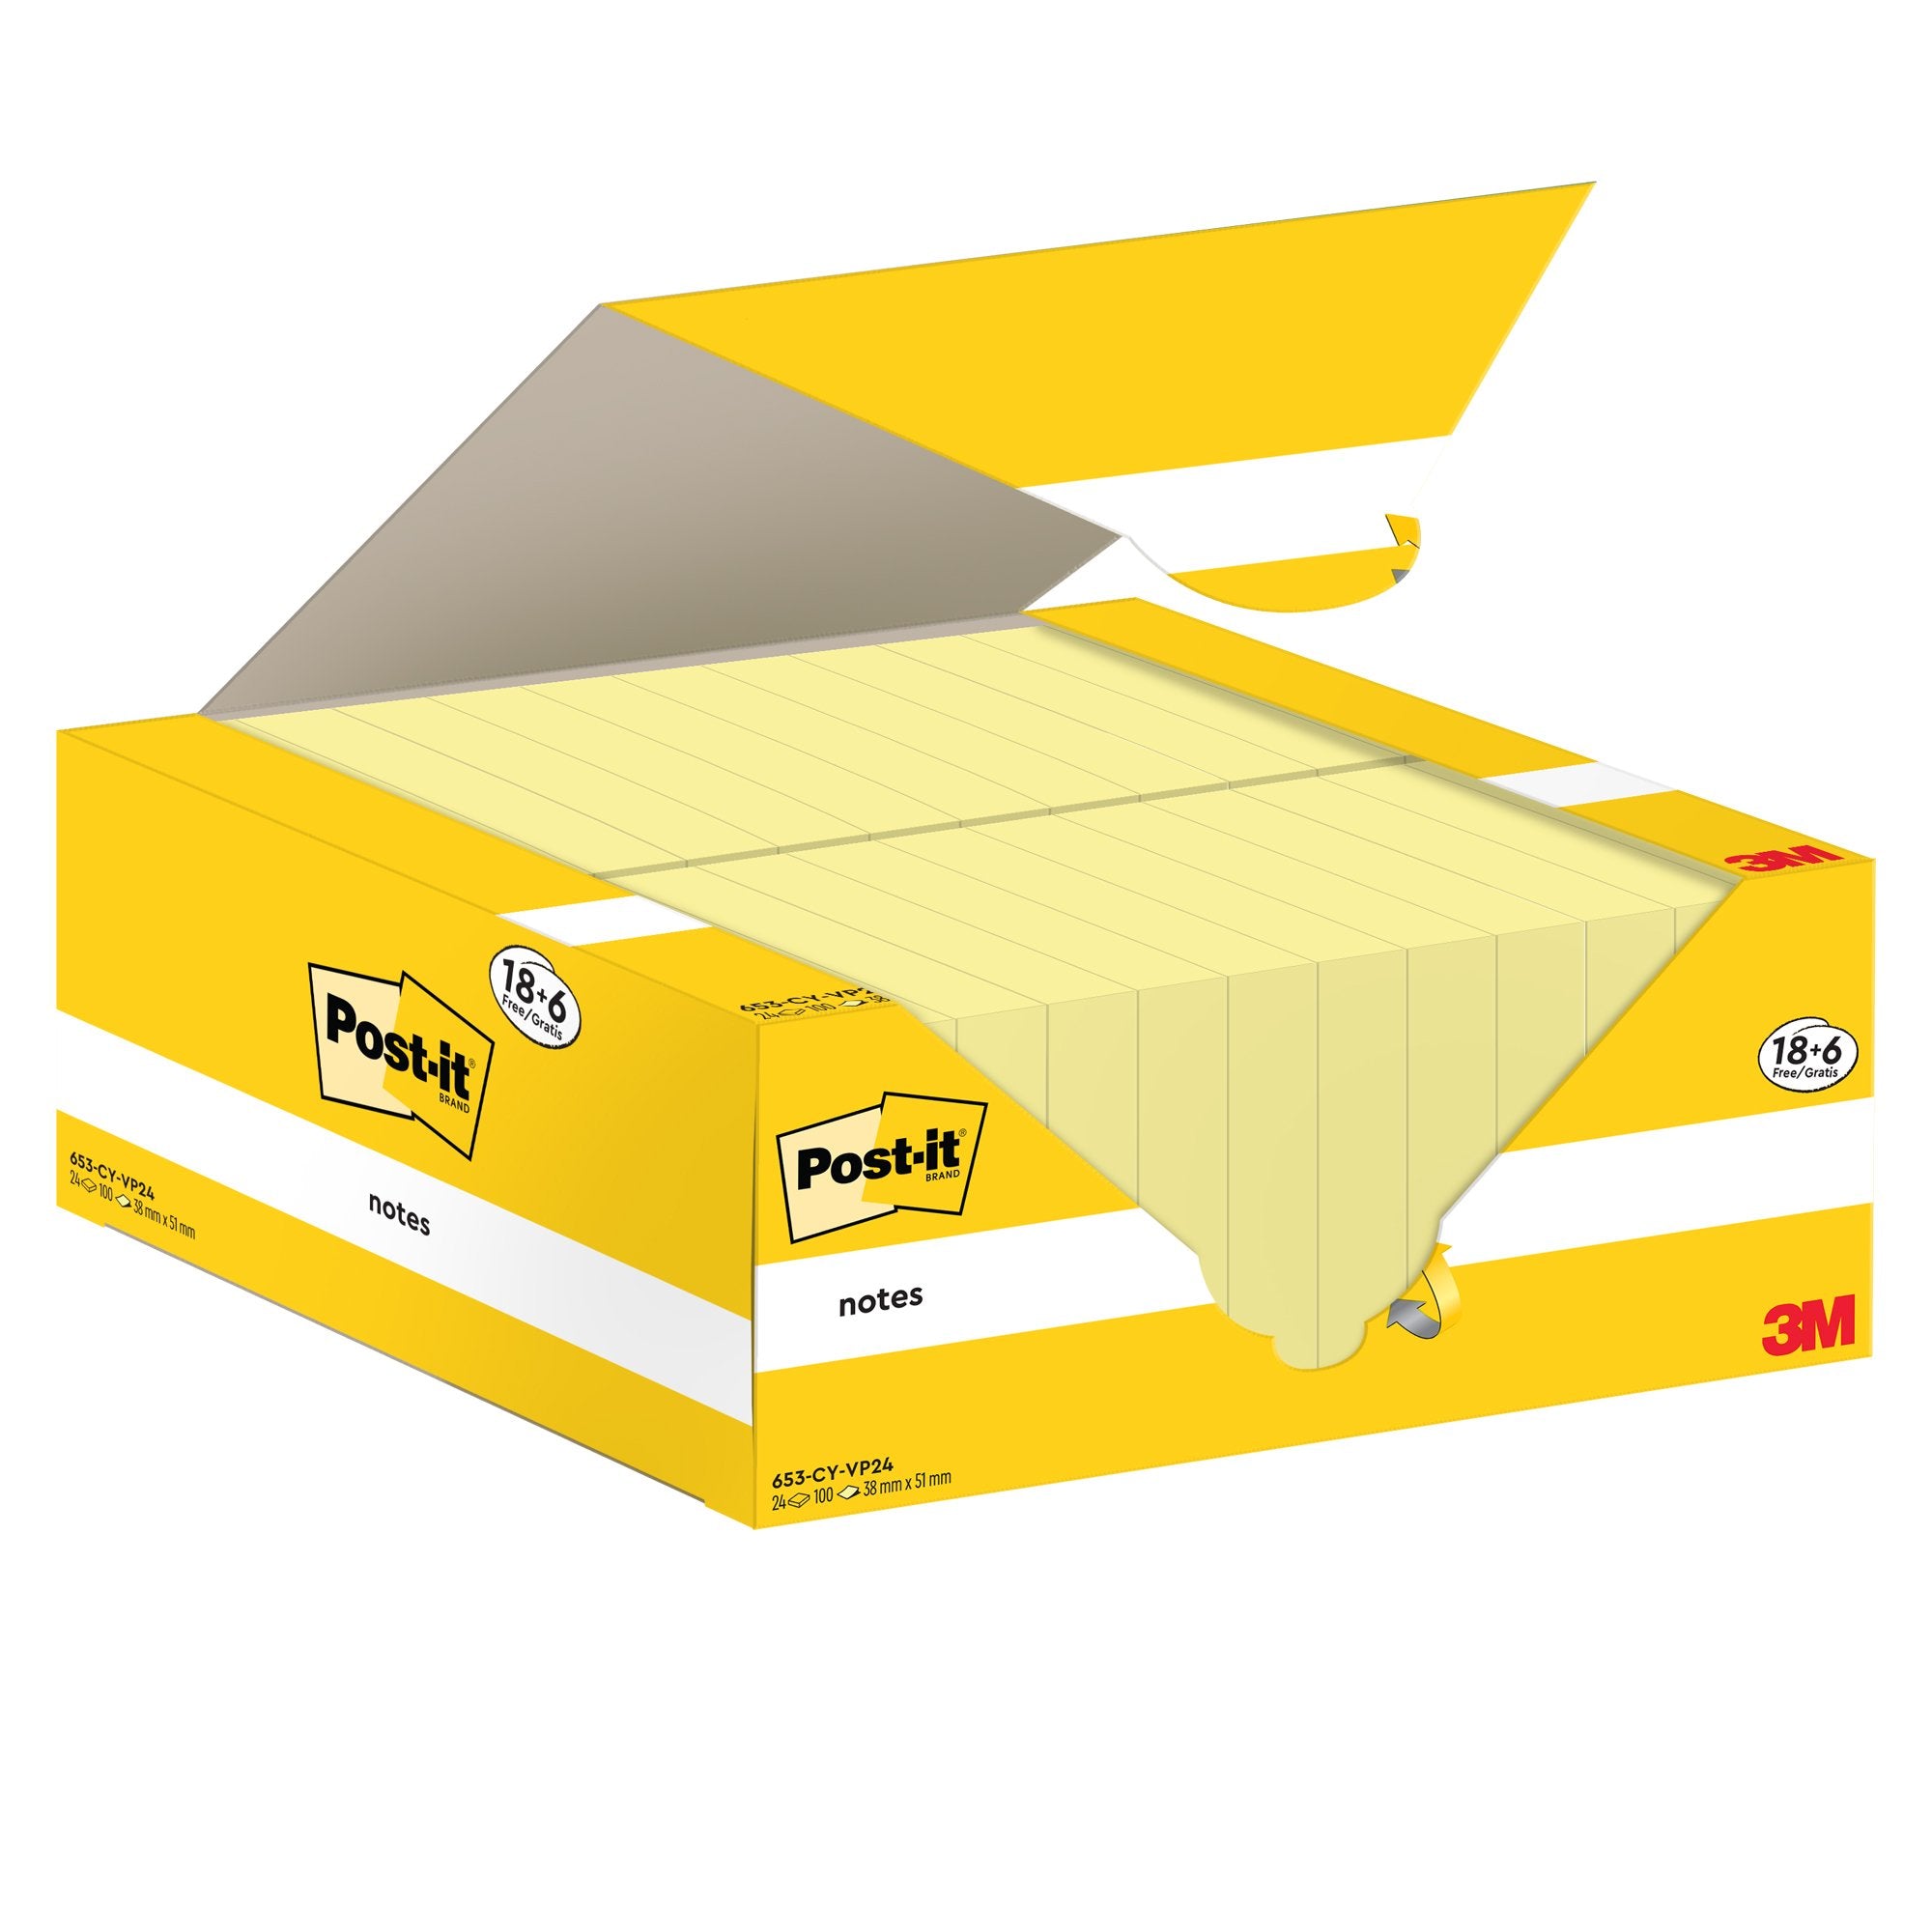 post-it-cf-186pz-blocco-100fg-notes-38x51mm-653-cy-vp24-giallo-canary